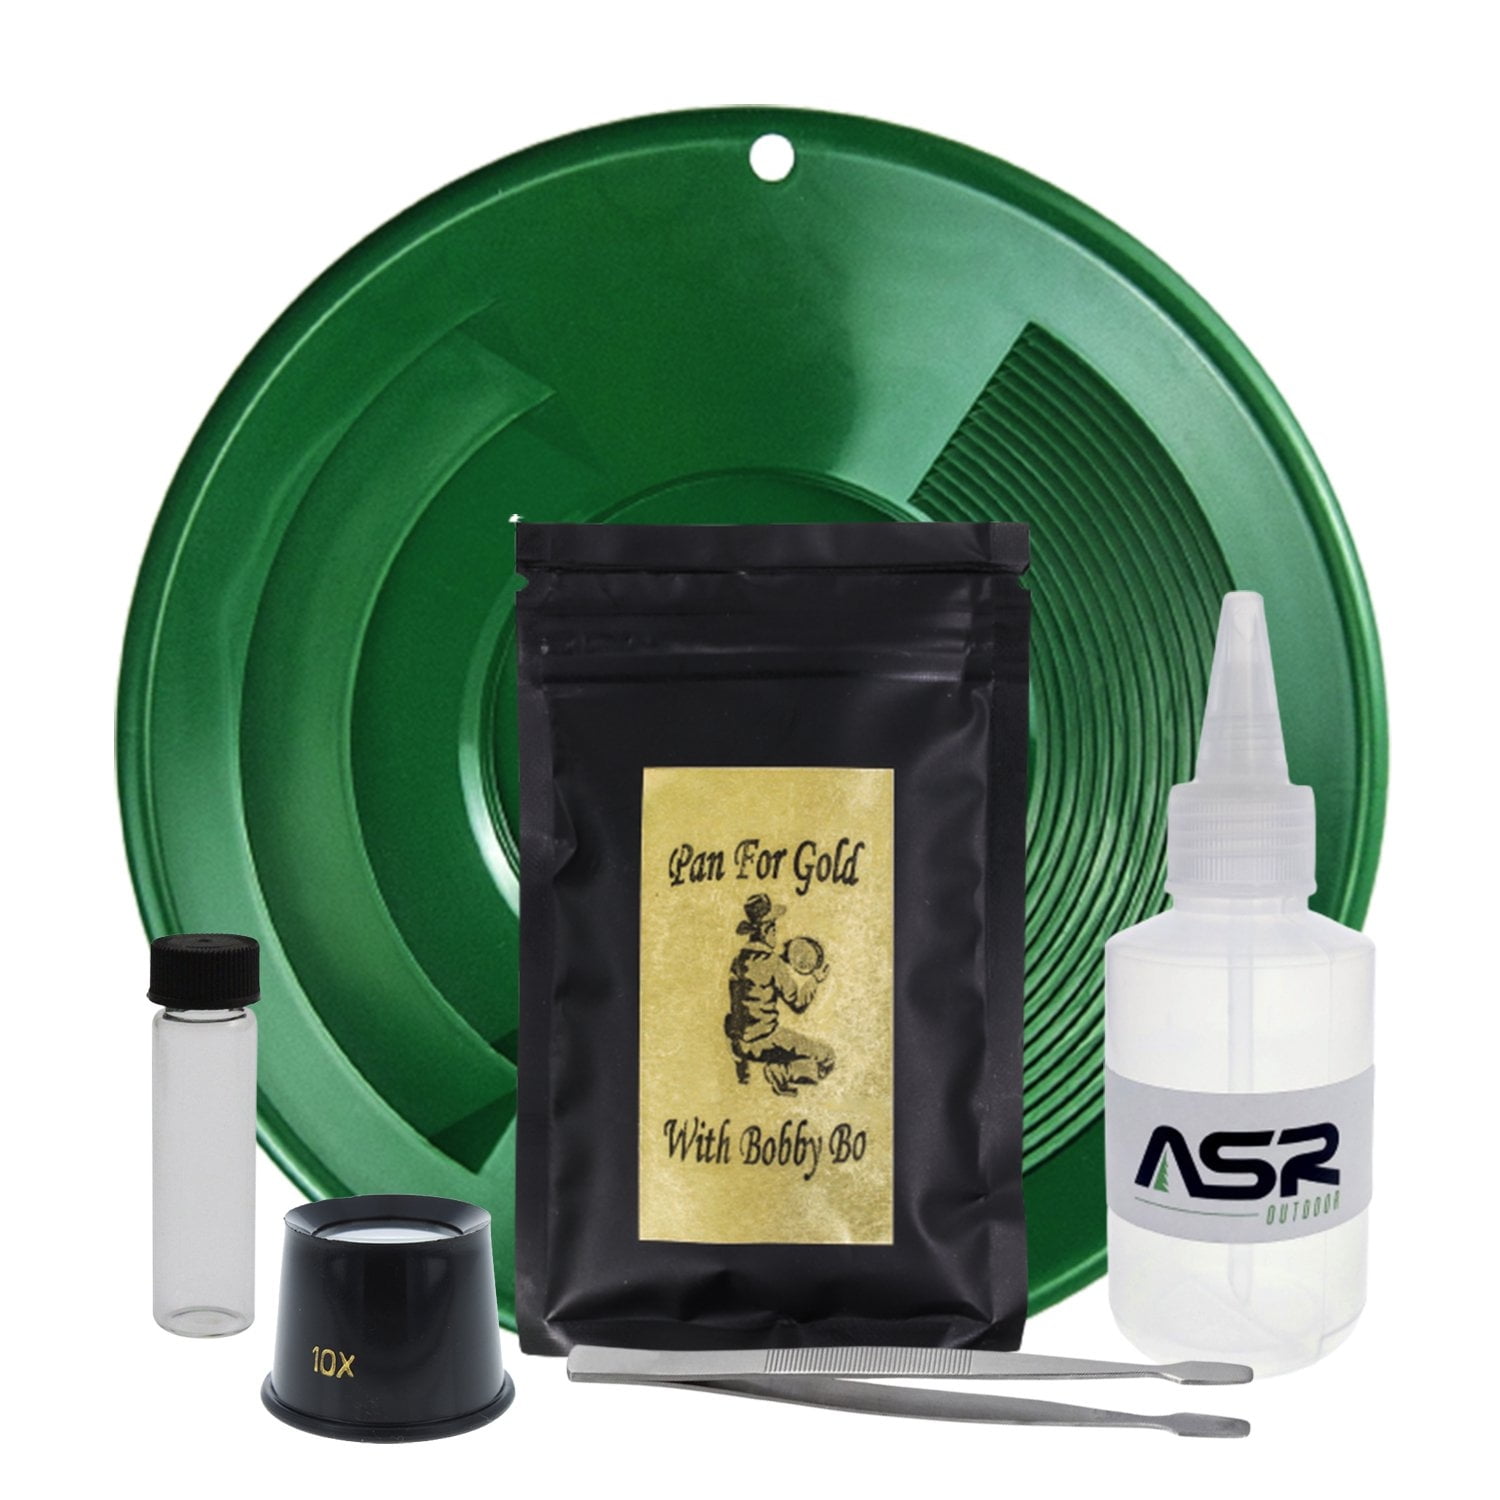 ASR Outdoor Complete 11pc Gold Panning Kit Prospecting Equipment with 1/2  and 1/8 Classifier Screens, Gold Pans